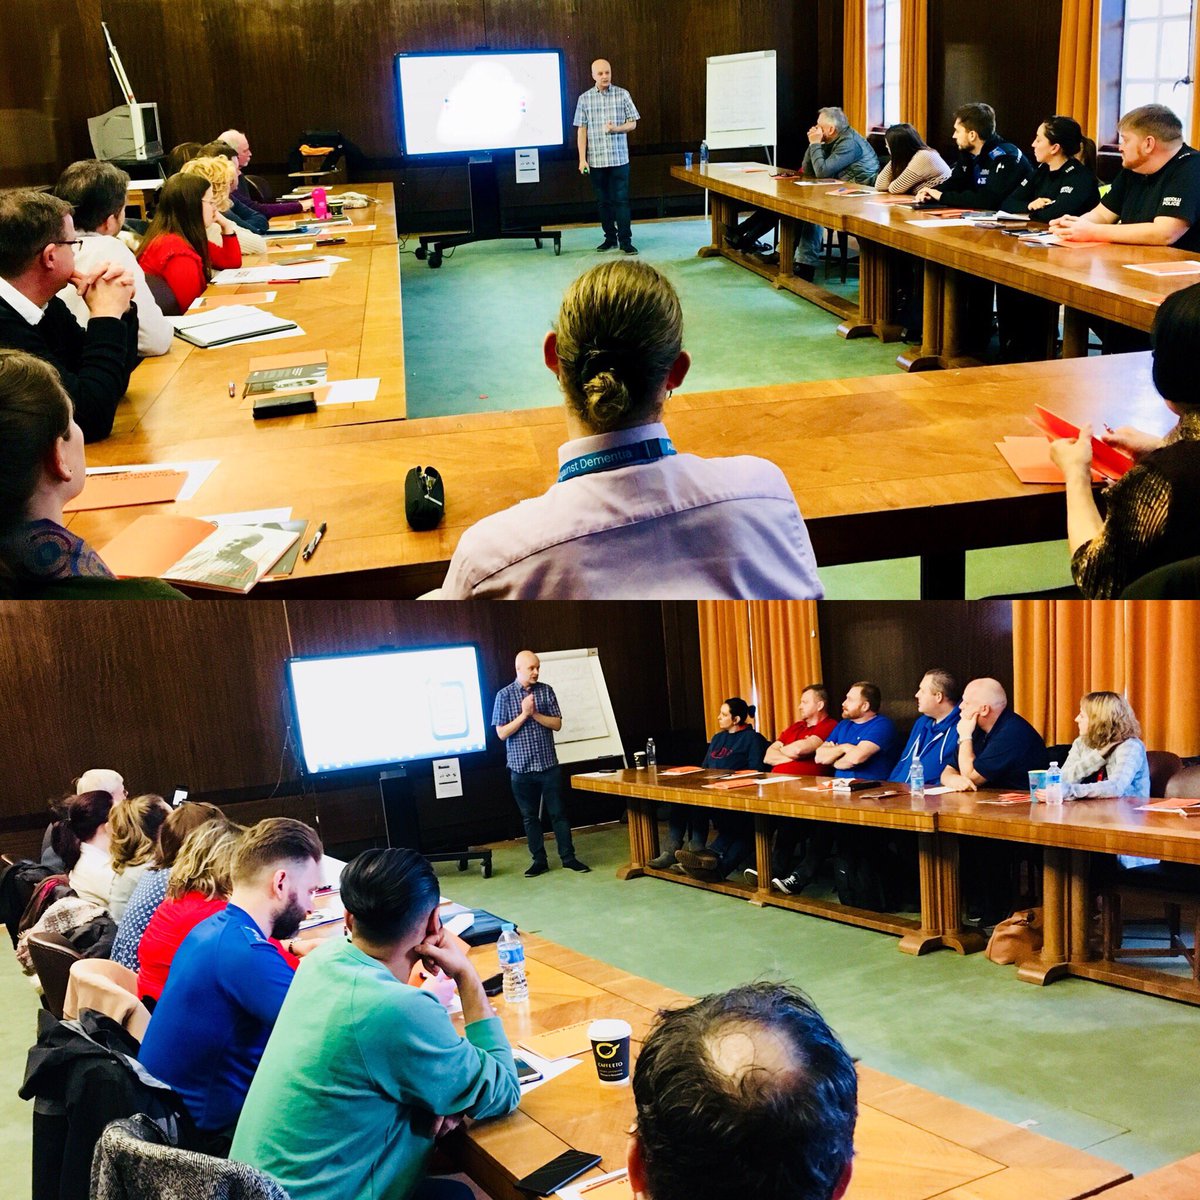 Two successful and thought provoking workshops with Small Steps Consultants smallstepsconsultants.com Far Right Awareness #counteringthefarright #signs #communitiesmakingastand #strongertogether #alternativenarratives #stophate Thank you to everyone who came! #fullhouse